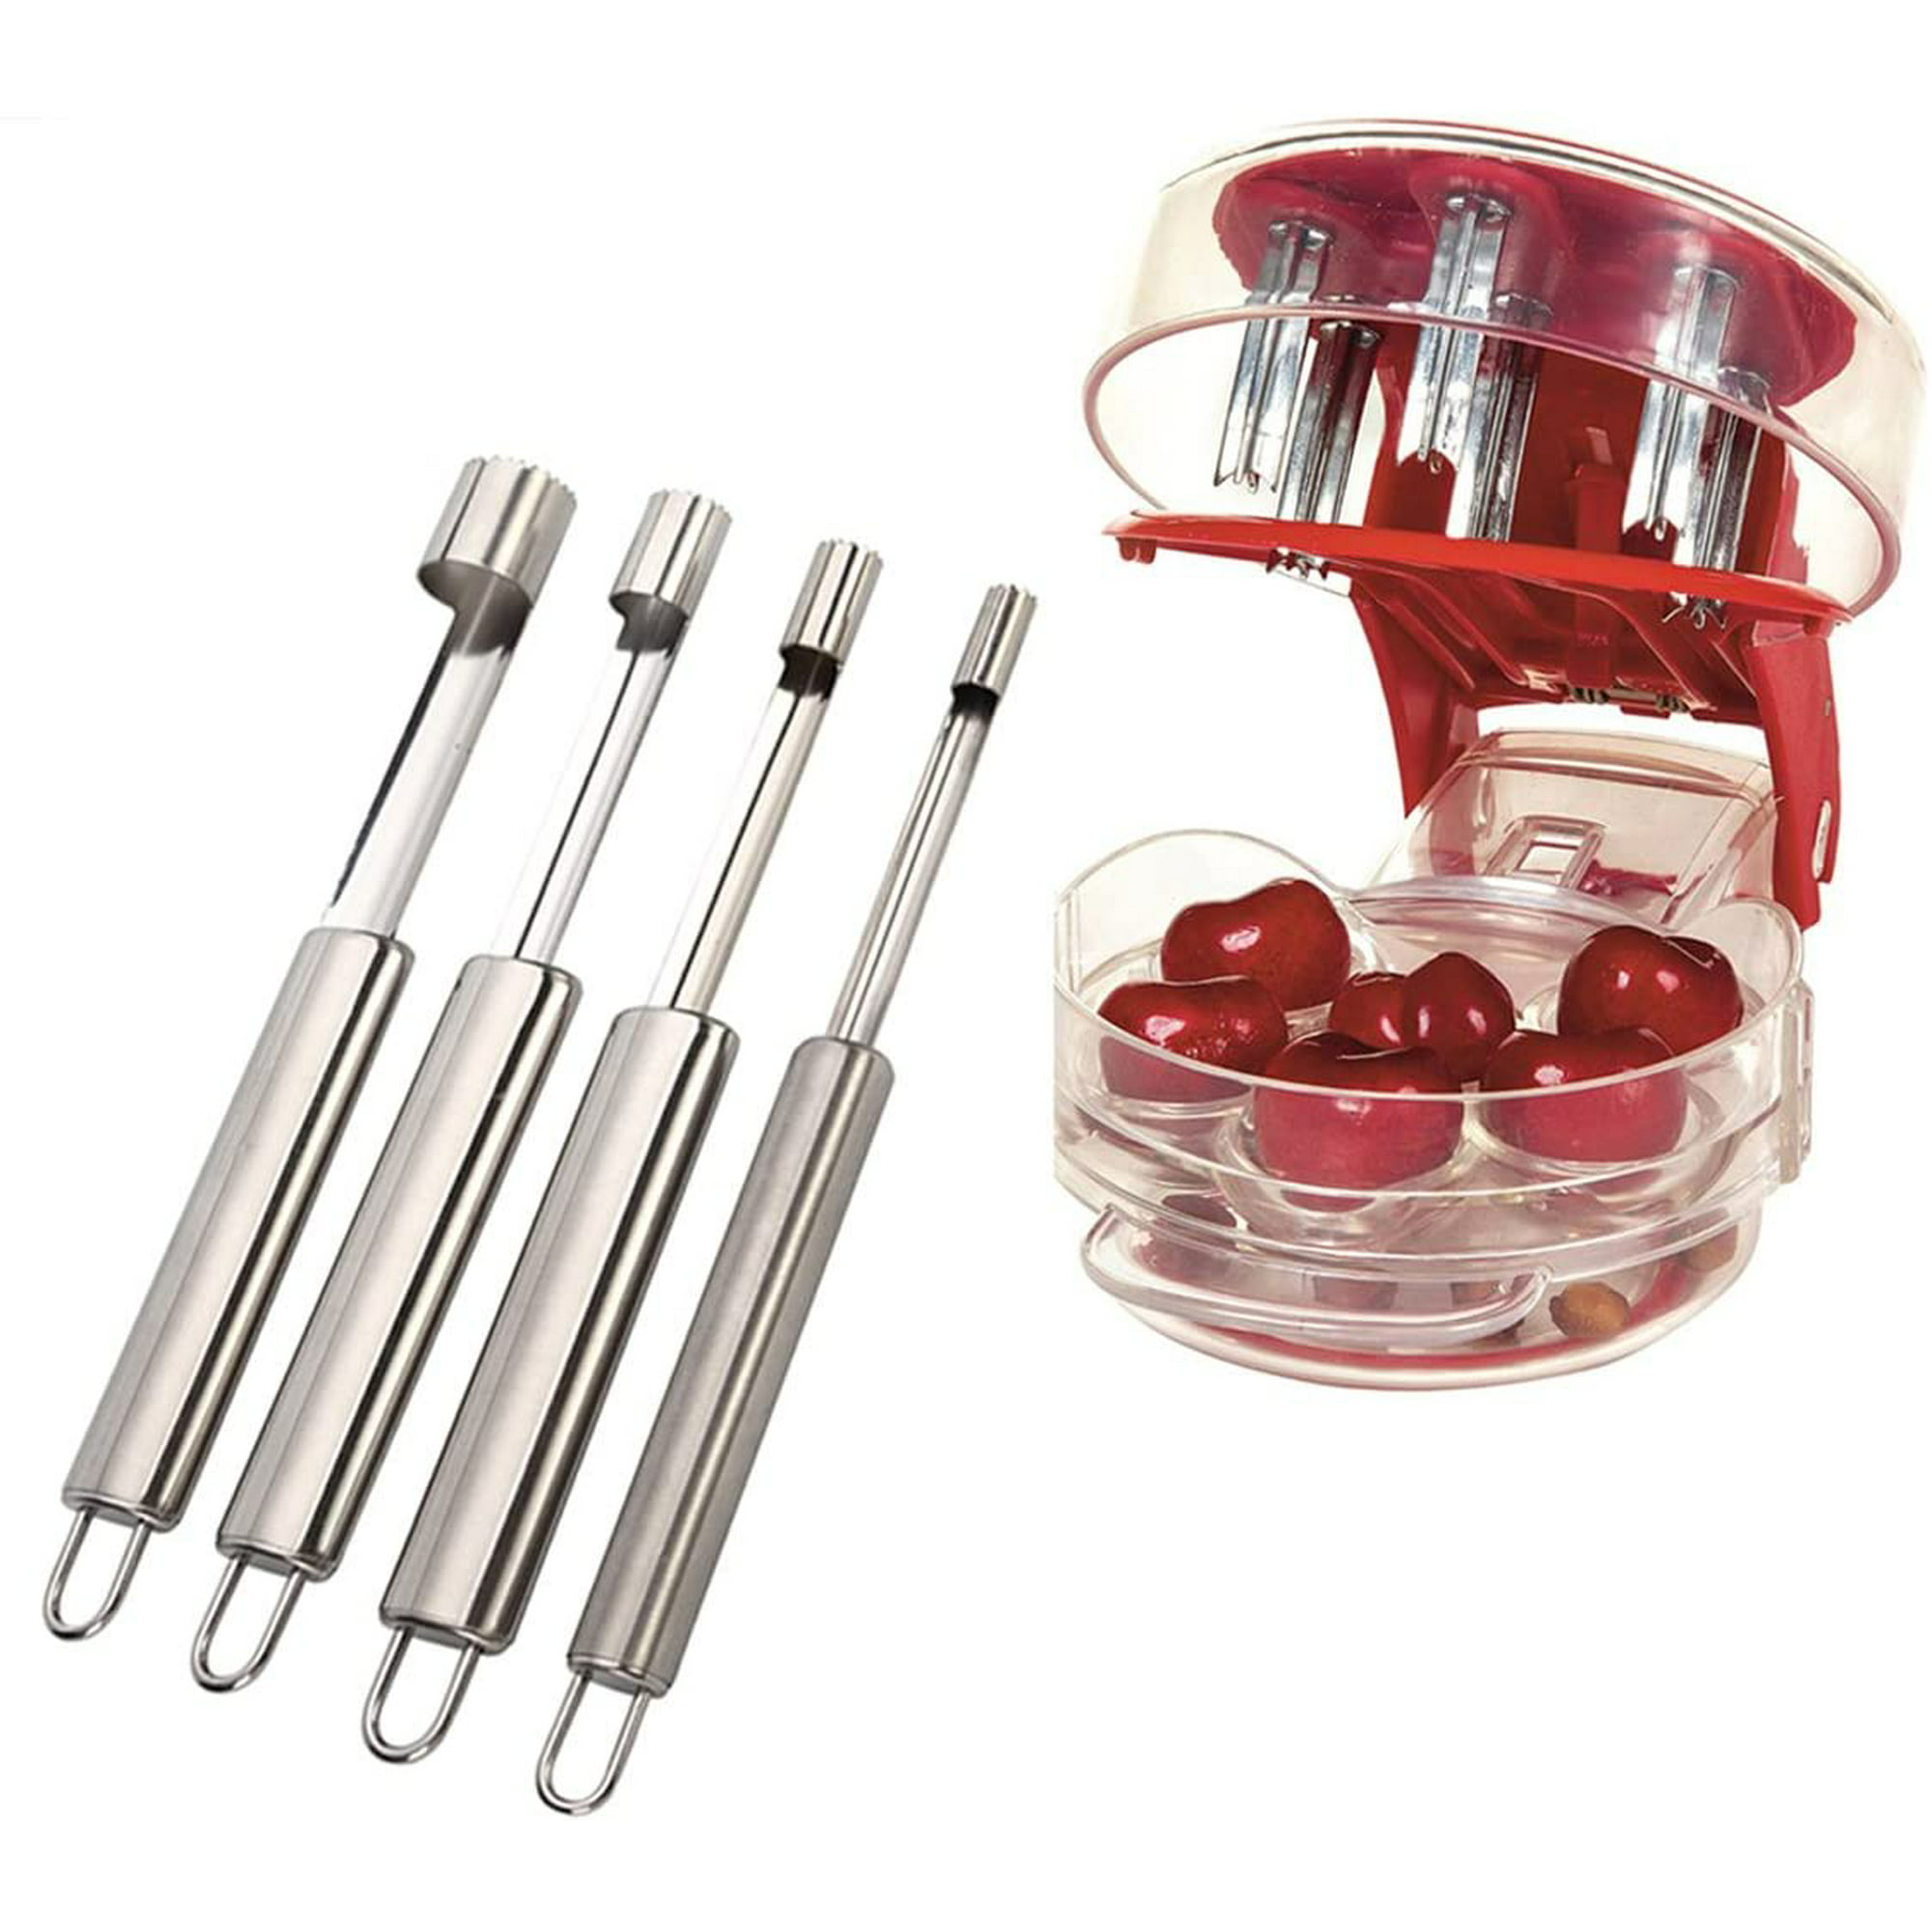 Cherry Pitter Machine With Fruit Corer Set Stainless Steel Core Pit Seed Remover Stem Stalk Huller Removal Kitchen Gadget Tool For Strawberry Apple Cherry Olive Plum Berry Food Extractor Kit Walmart Canada